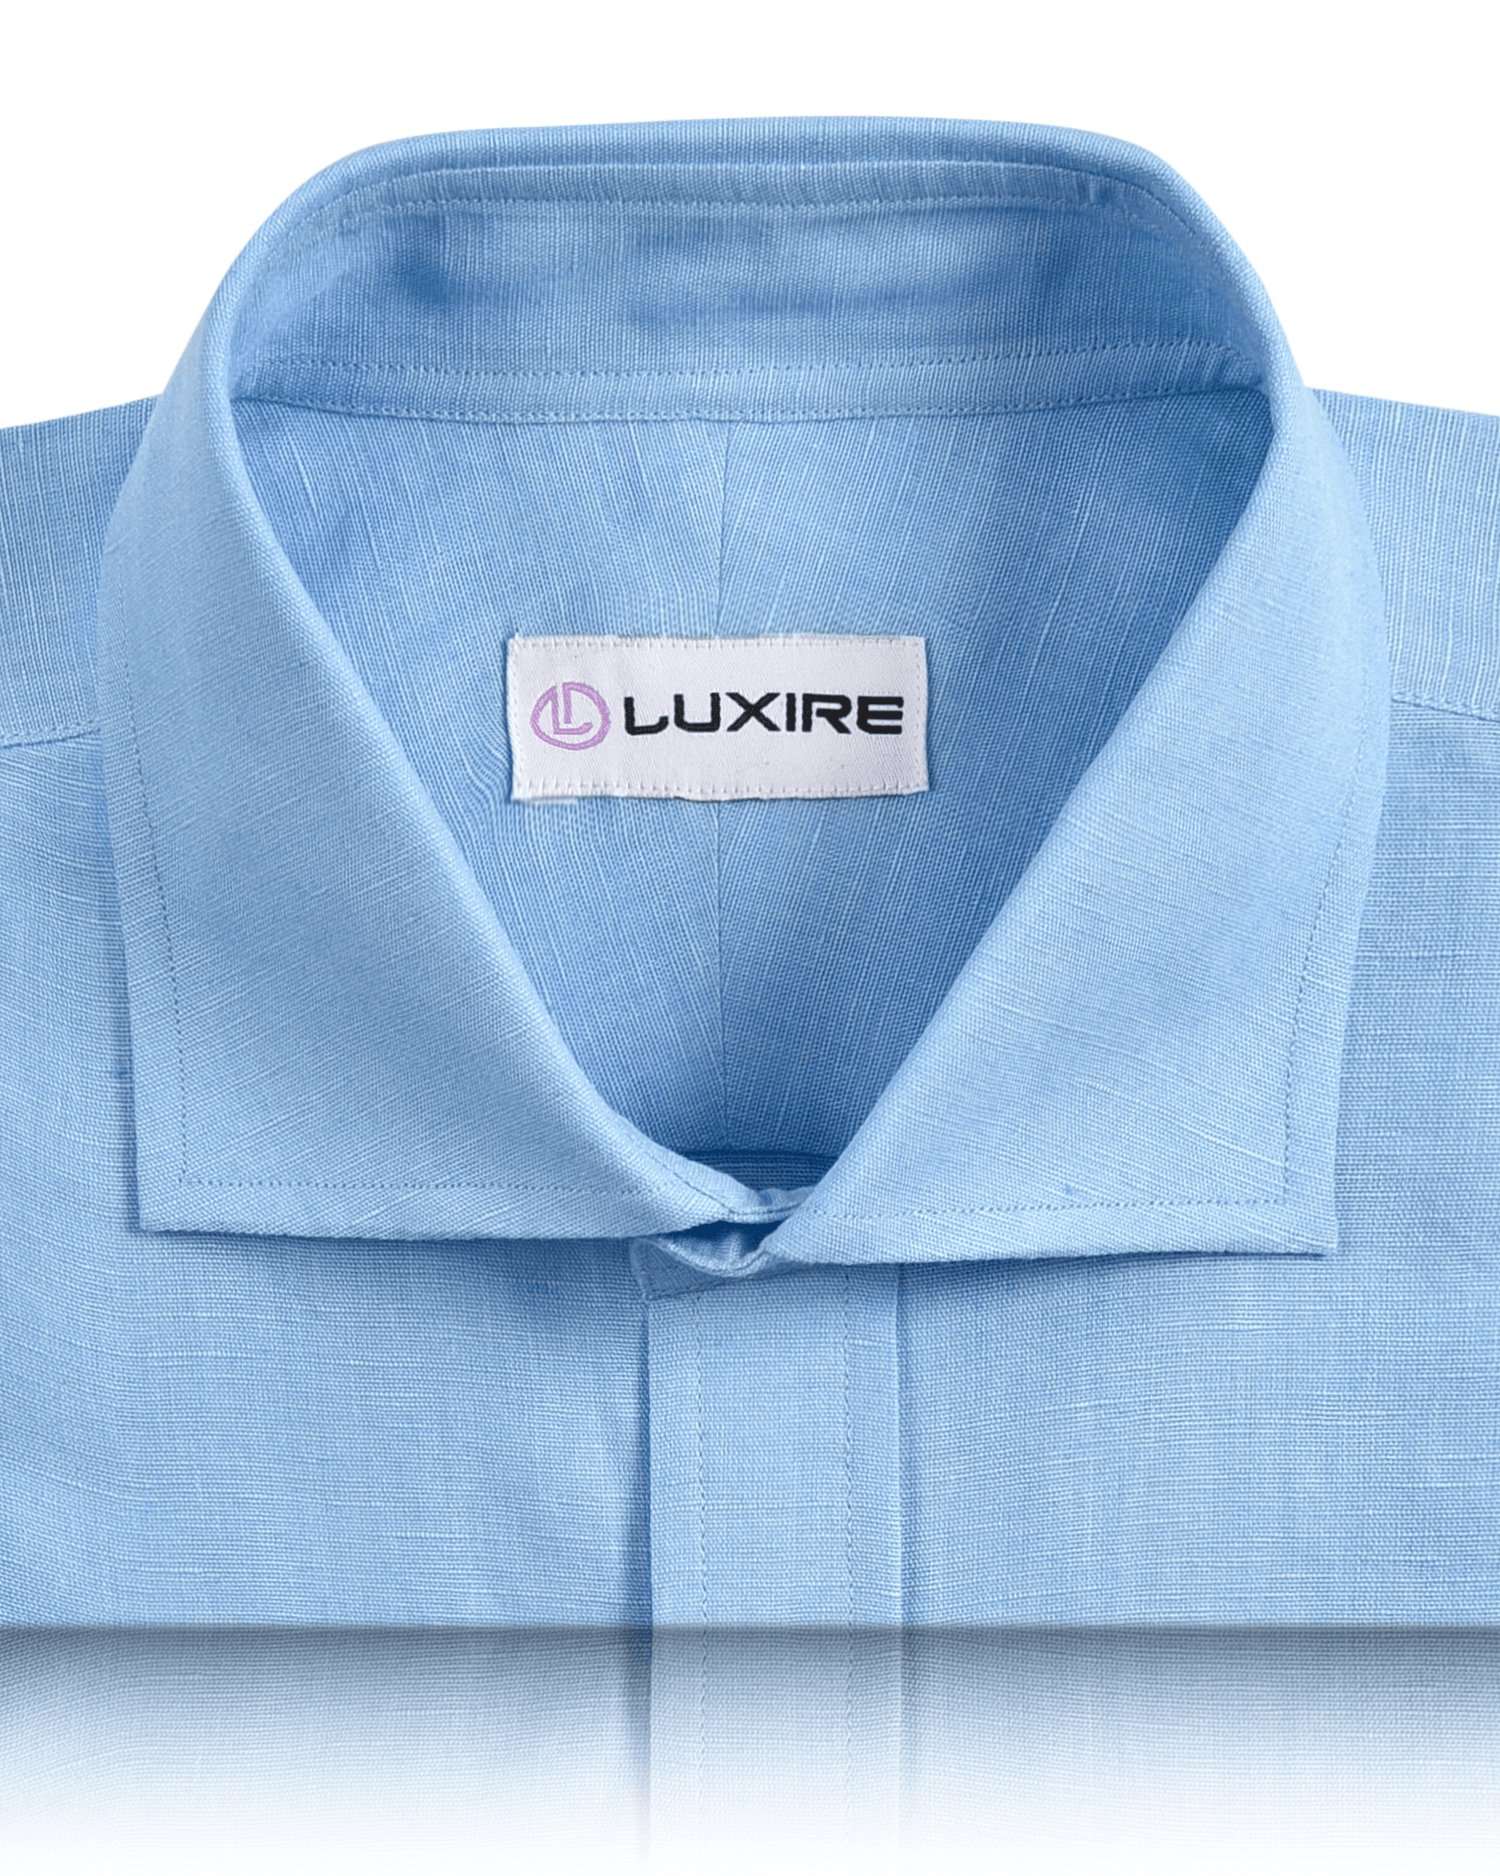 Collar of the custom linen shirt for men in mid blue by Luxire Clothing